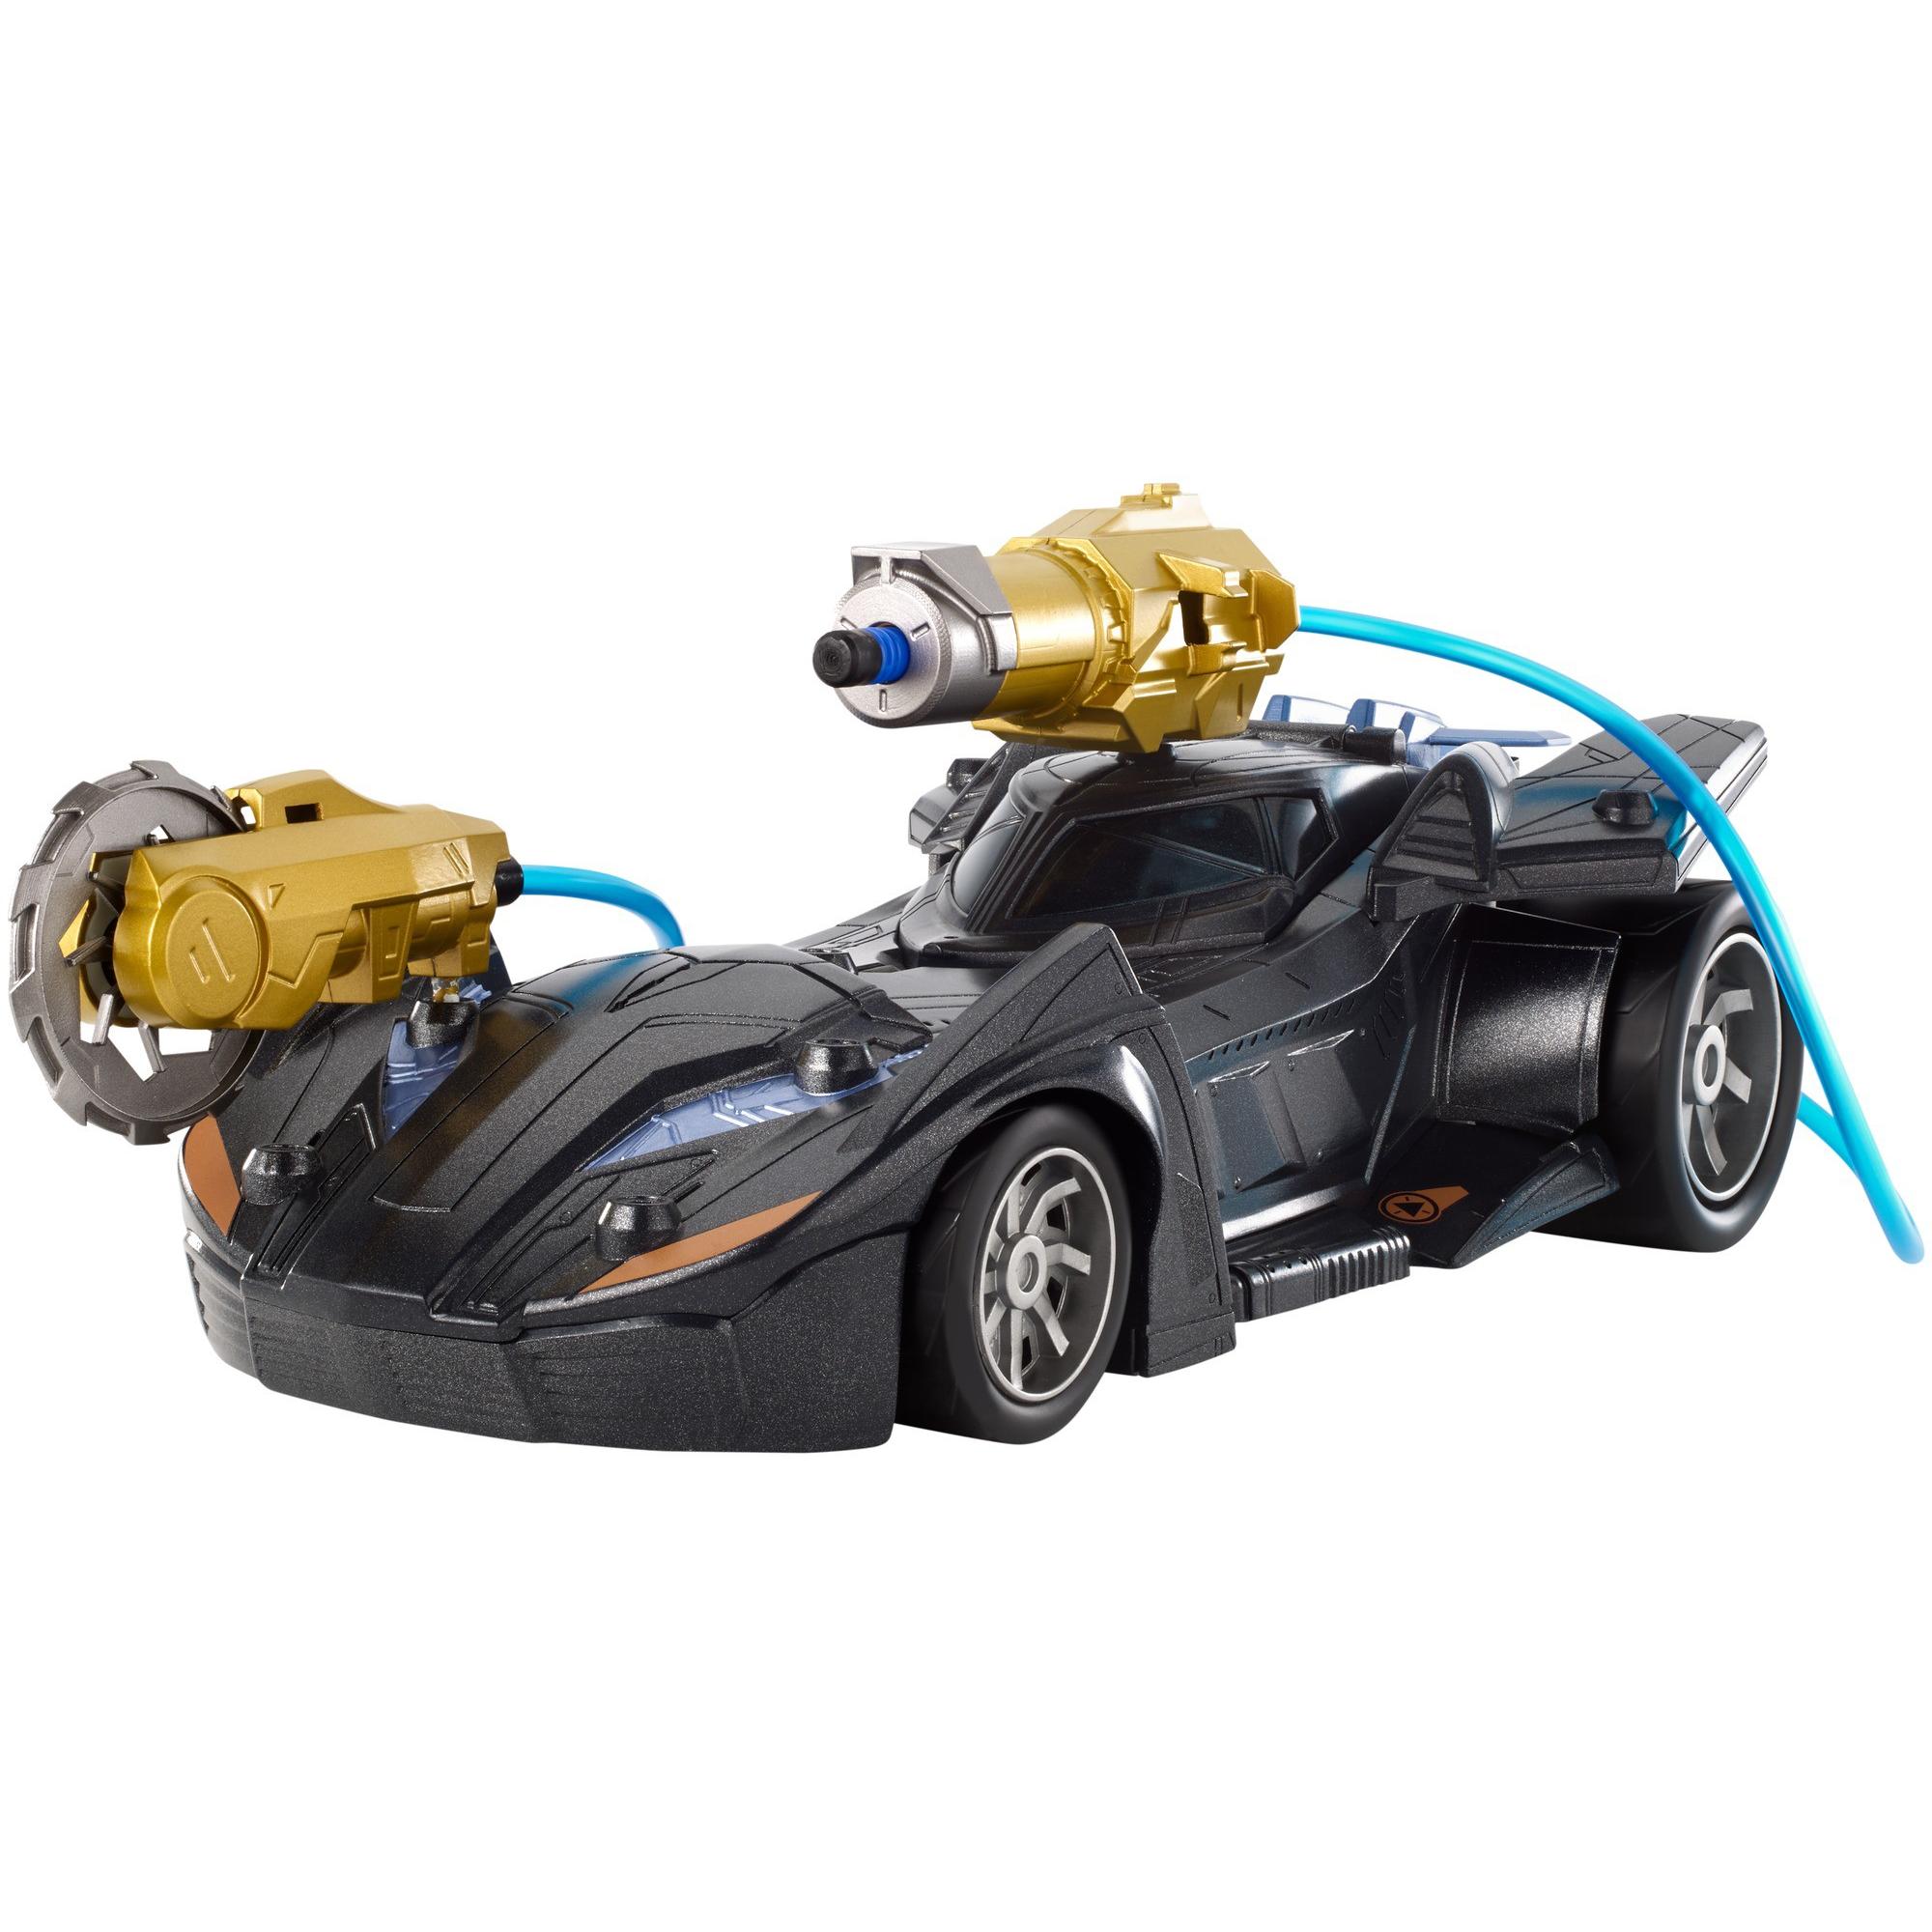 Batman Missions Air Power Cannon Attack Batmobile Vehicle - image 5 of 8